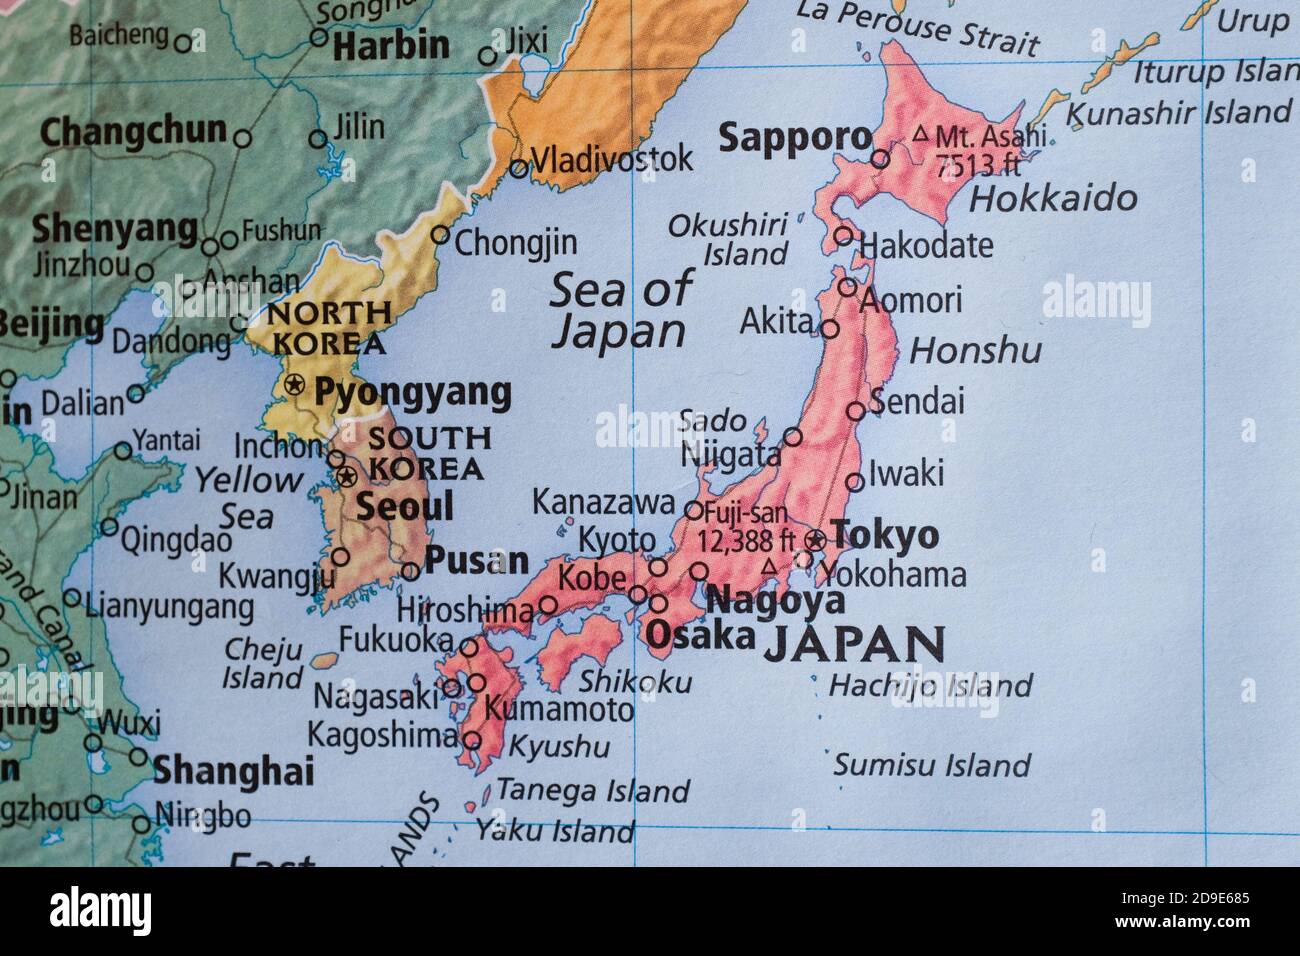 A map showing Japan as well as South and North Korea. Stock Photo